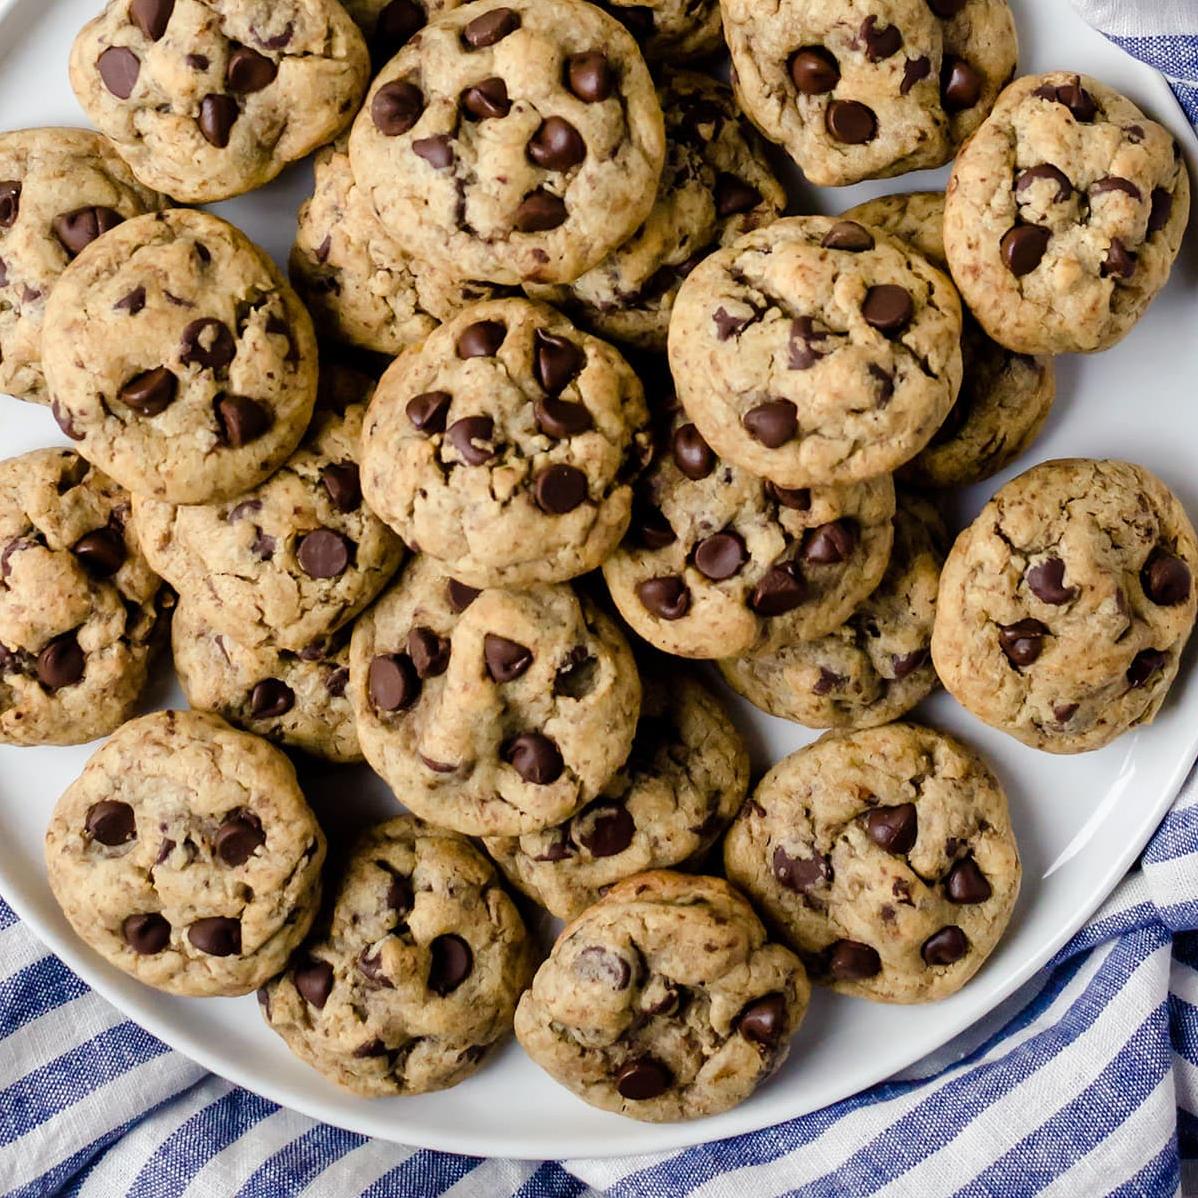  These cookies are the definition of sweet and savory.